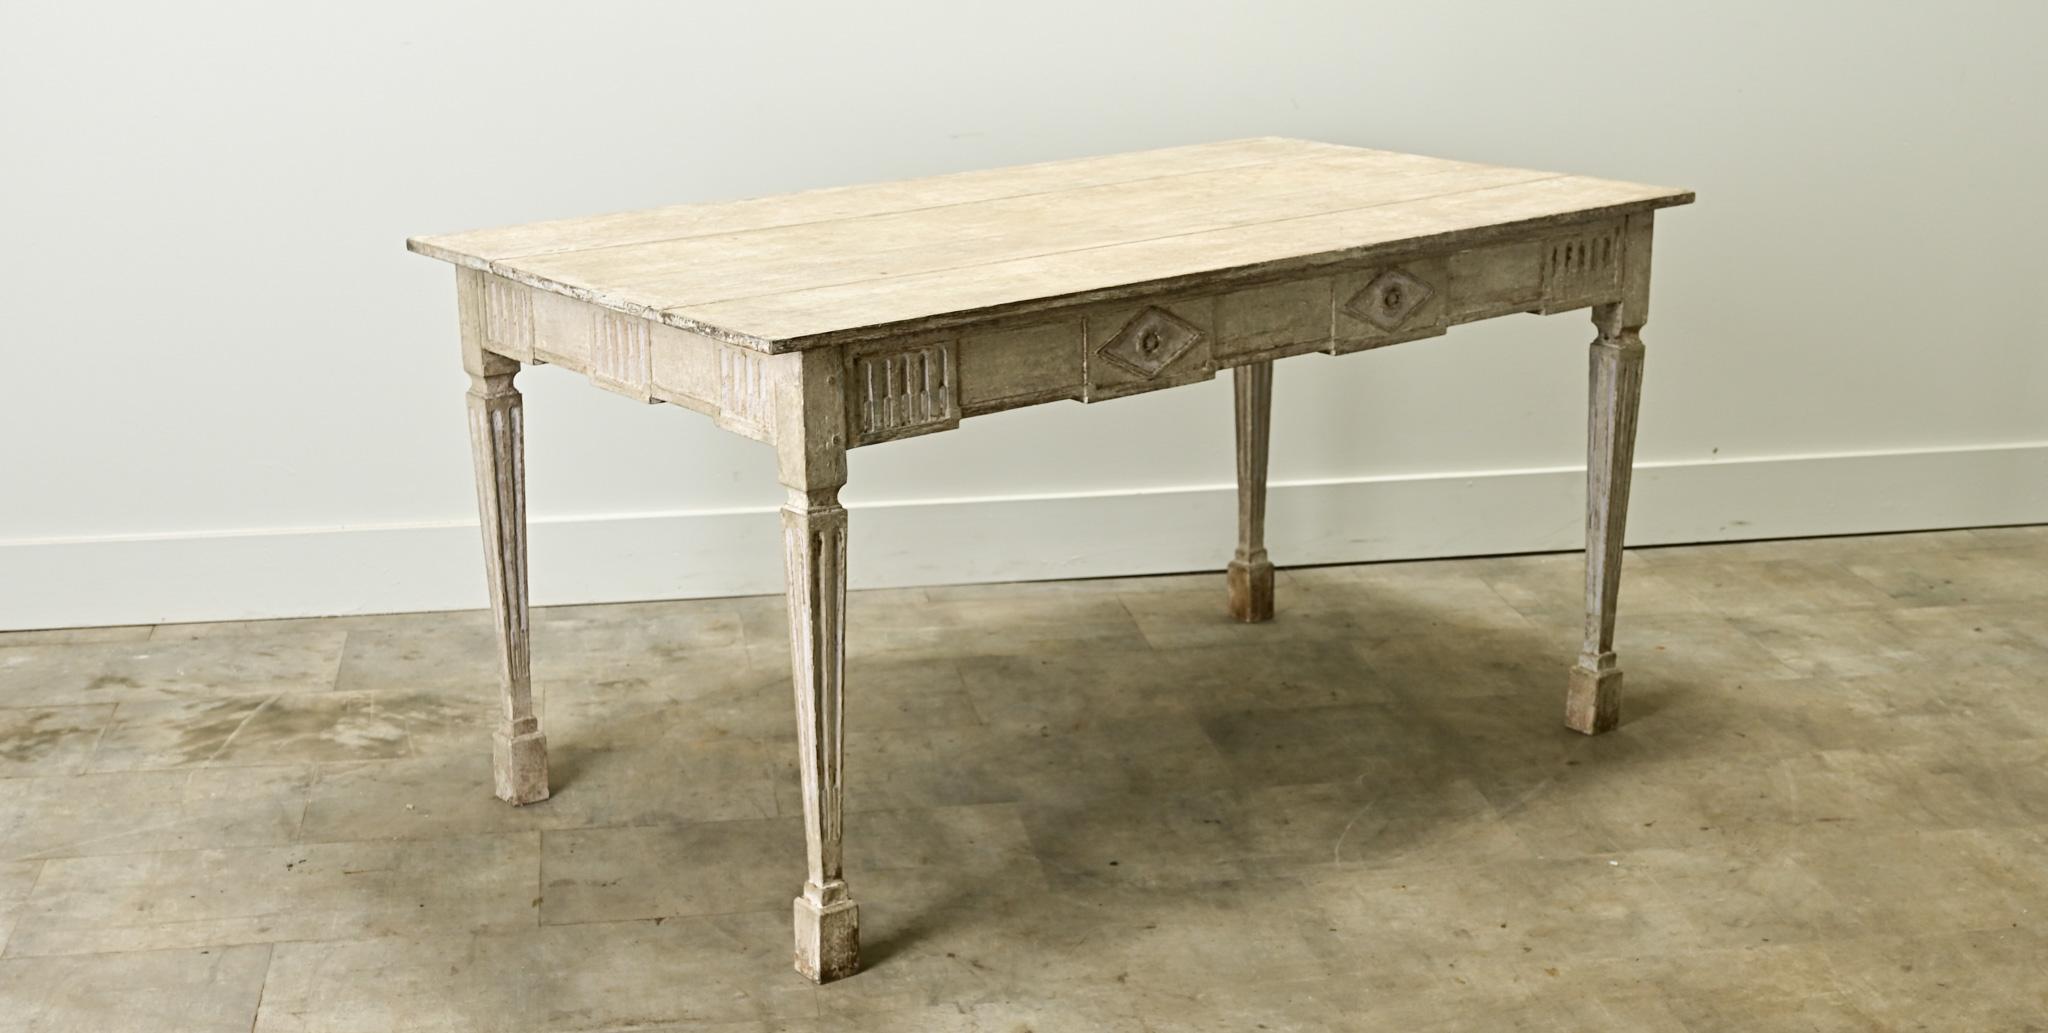 A large Swedish Gustavisn style center table with its original paint finish. This table can be used as a desk, console or center table as it is finished on all sides. The simple top sits over a carved table apron with classic diamond shapes and